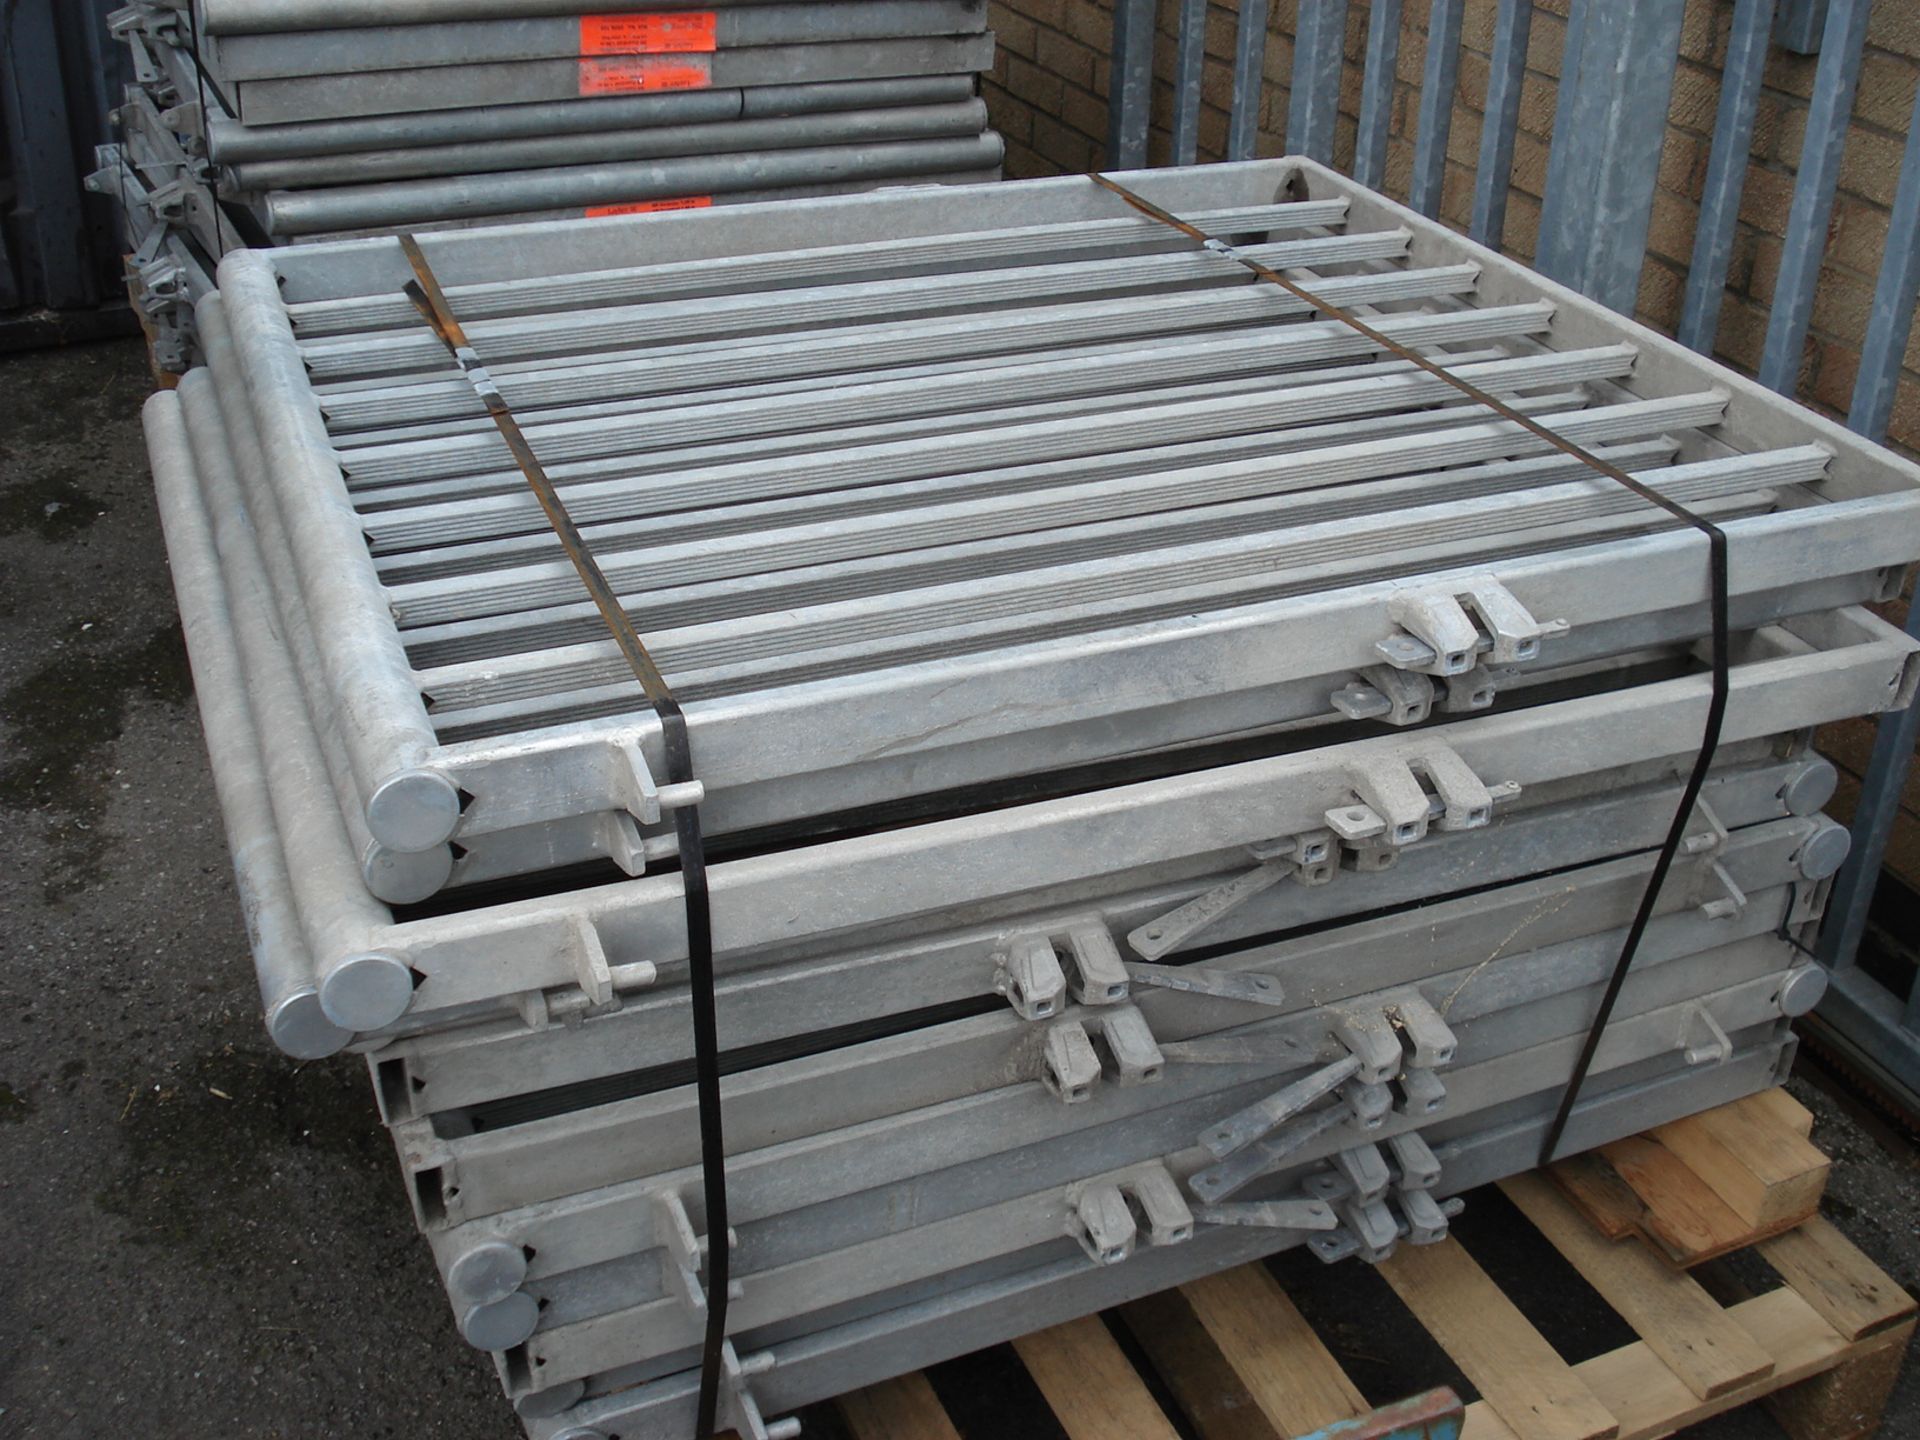 2 Pallets of 30 Metal Guard Rails - 43" x 37" - Image 2 of 3